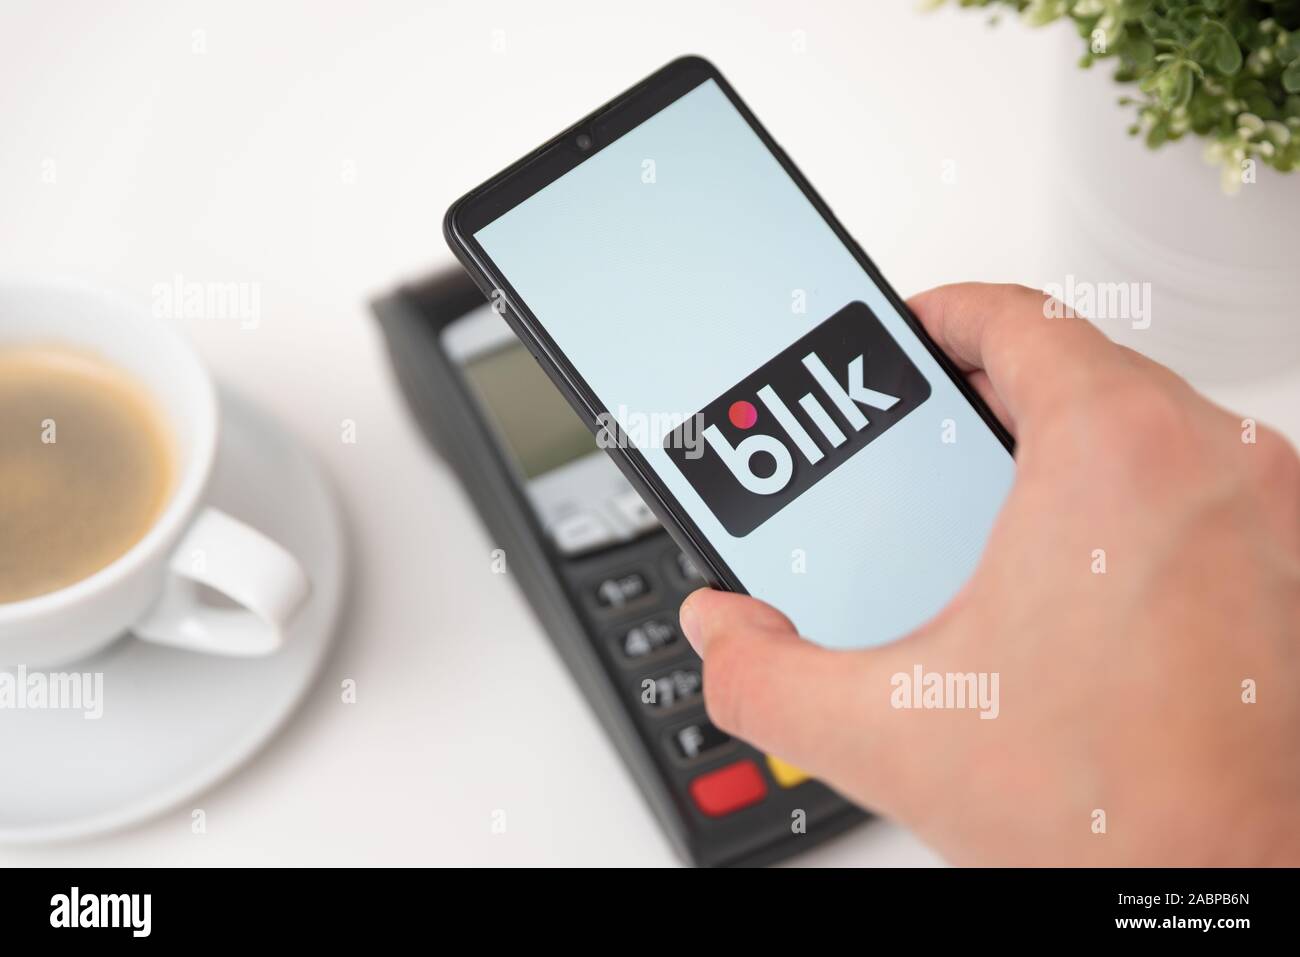 Wroclaw, Poland - NOV 06, 2019: Man holding smartphone with Blik logo, contactless payment. Blik is Polish most popular quick payment method in Poland Stock Photo